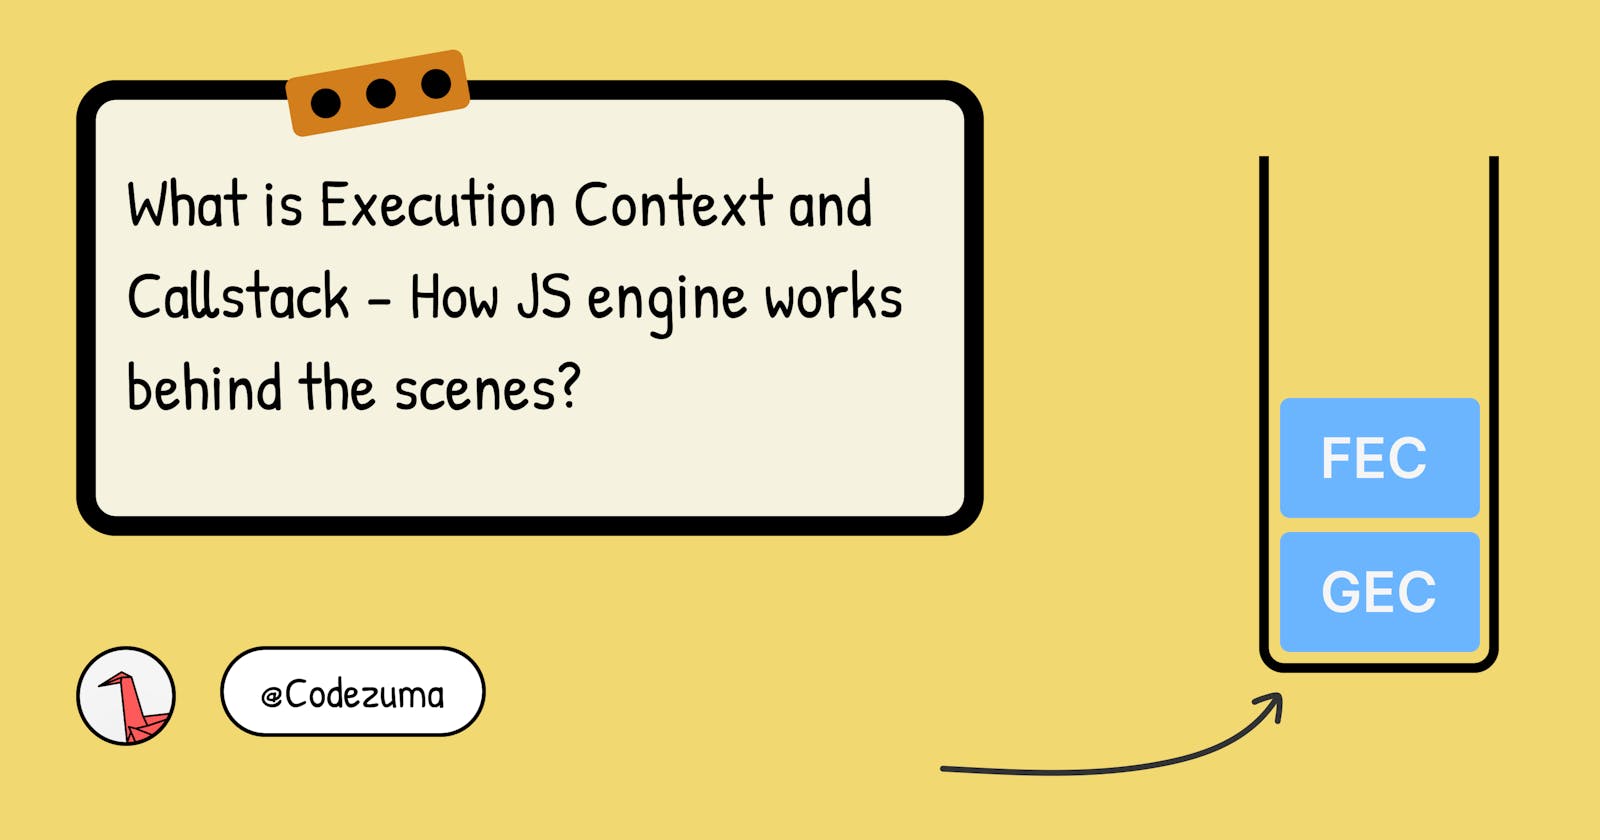 What is Execution Context and Callstack - How JS engine works behind the scenes?